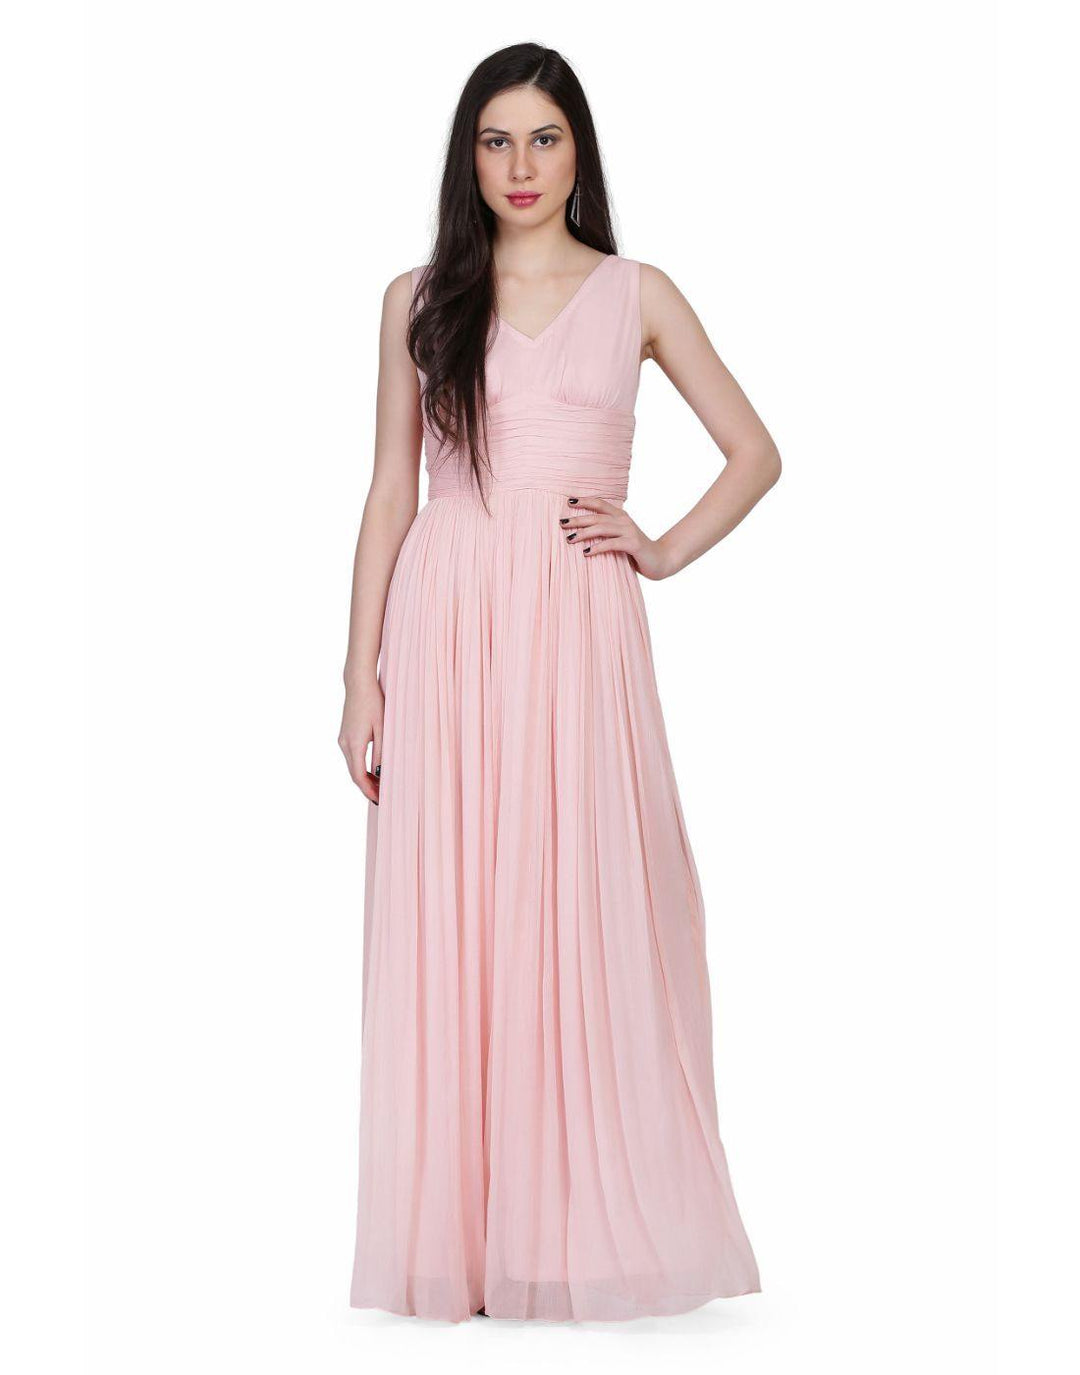 Rent Miracolos by Ruchi Women's Chiffon Party Evening Gowns Light Pink-Women-Glamourental